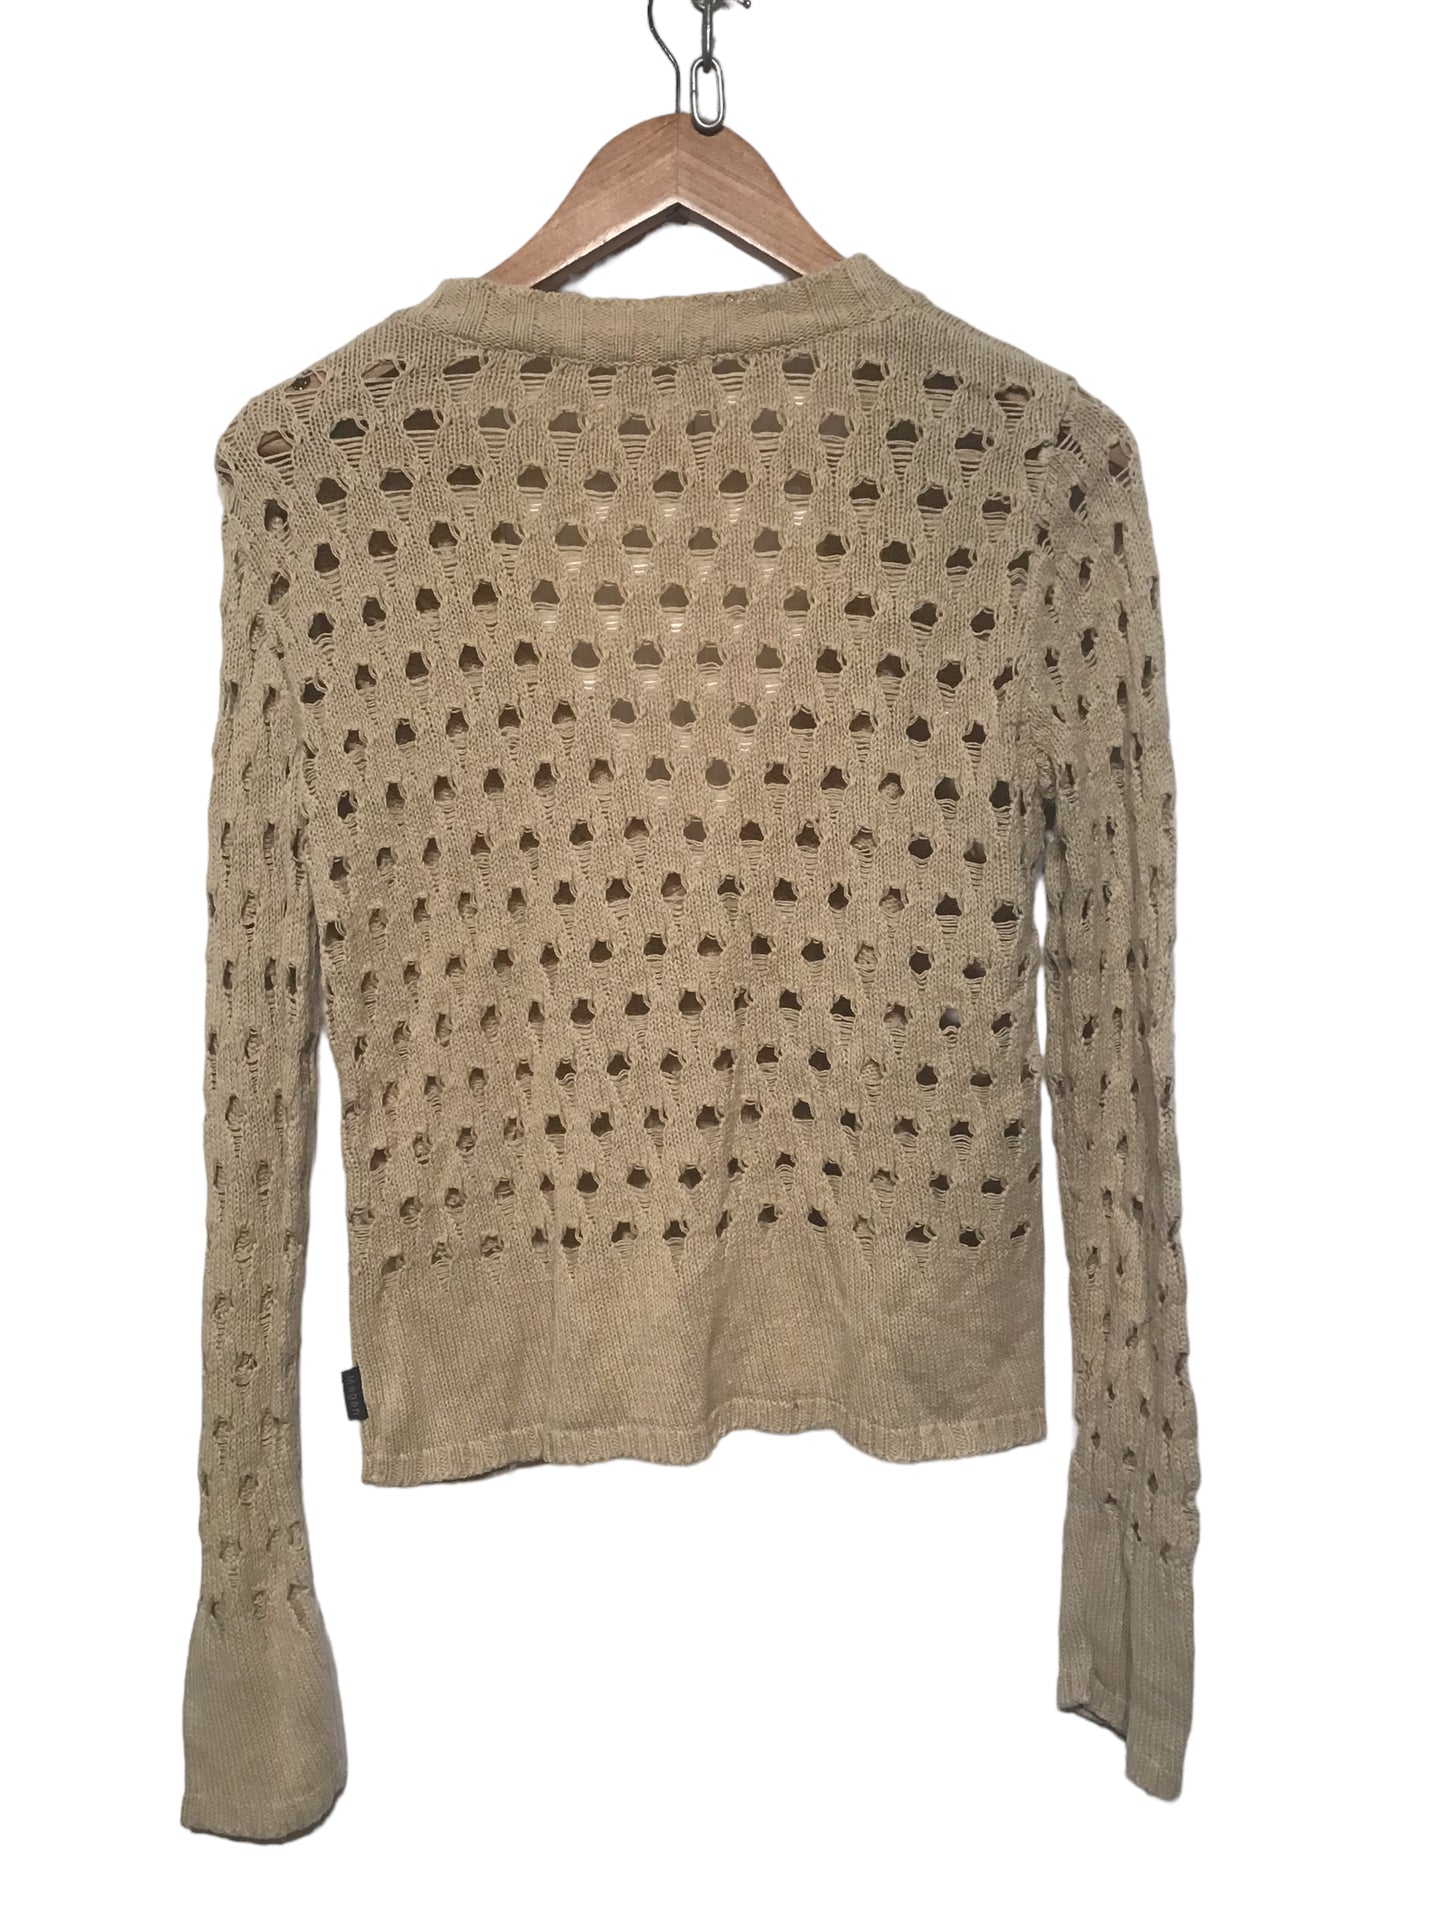 Magan Knitted Cut-Out Cardigan (Size M)